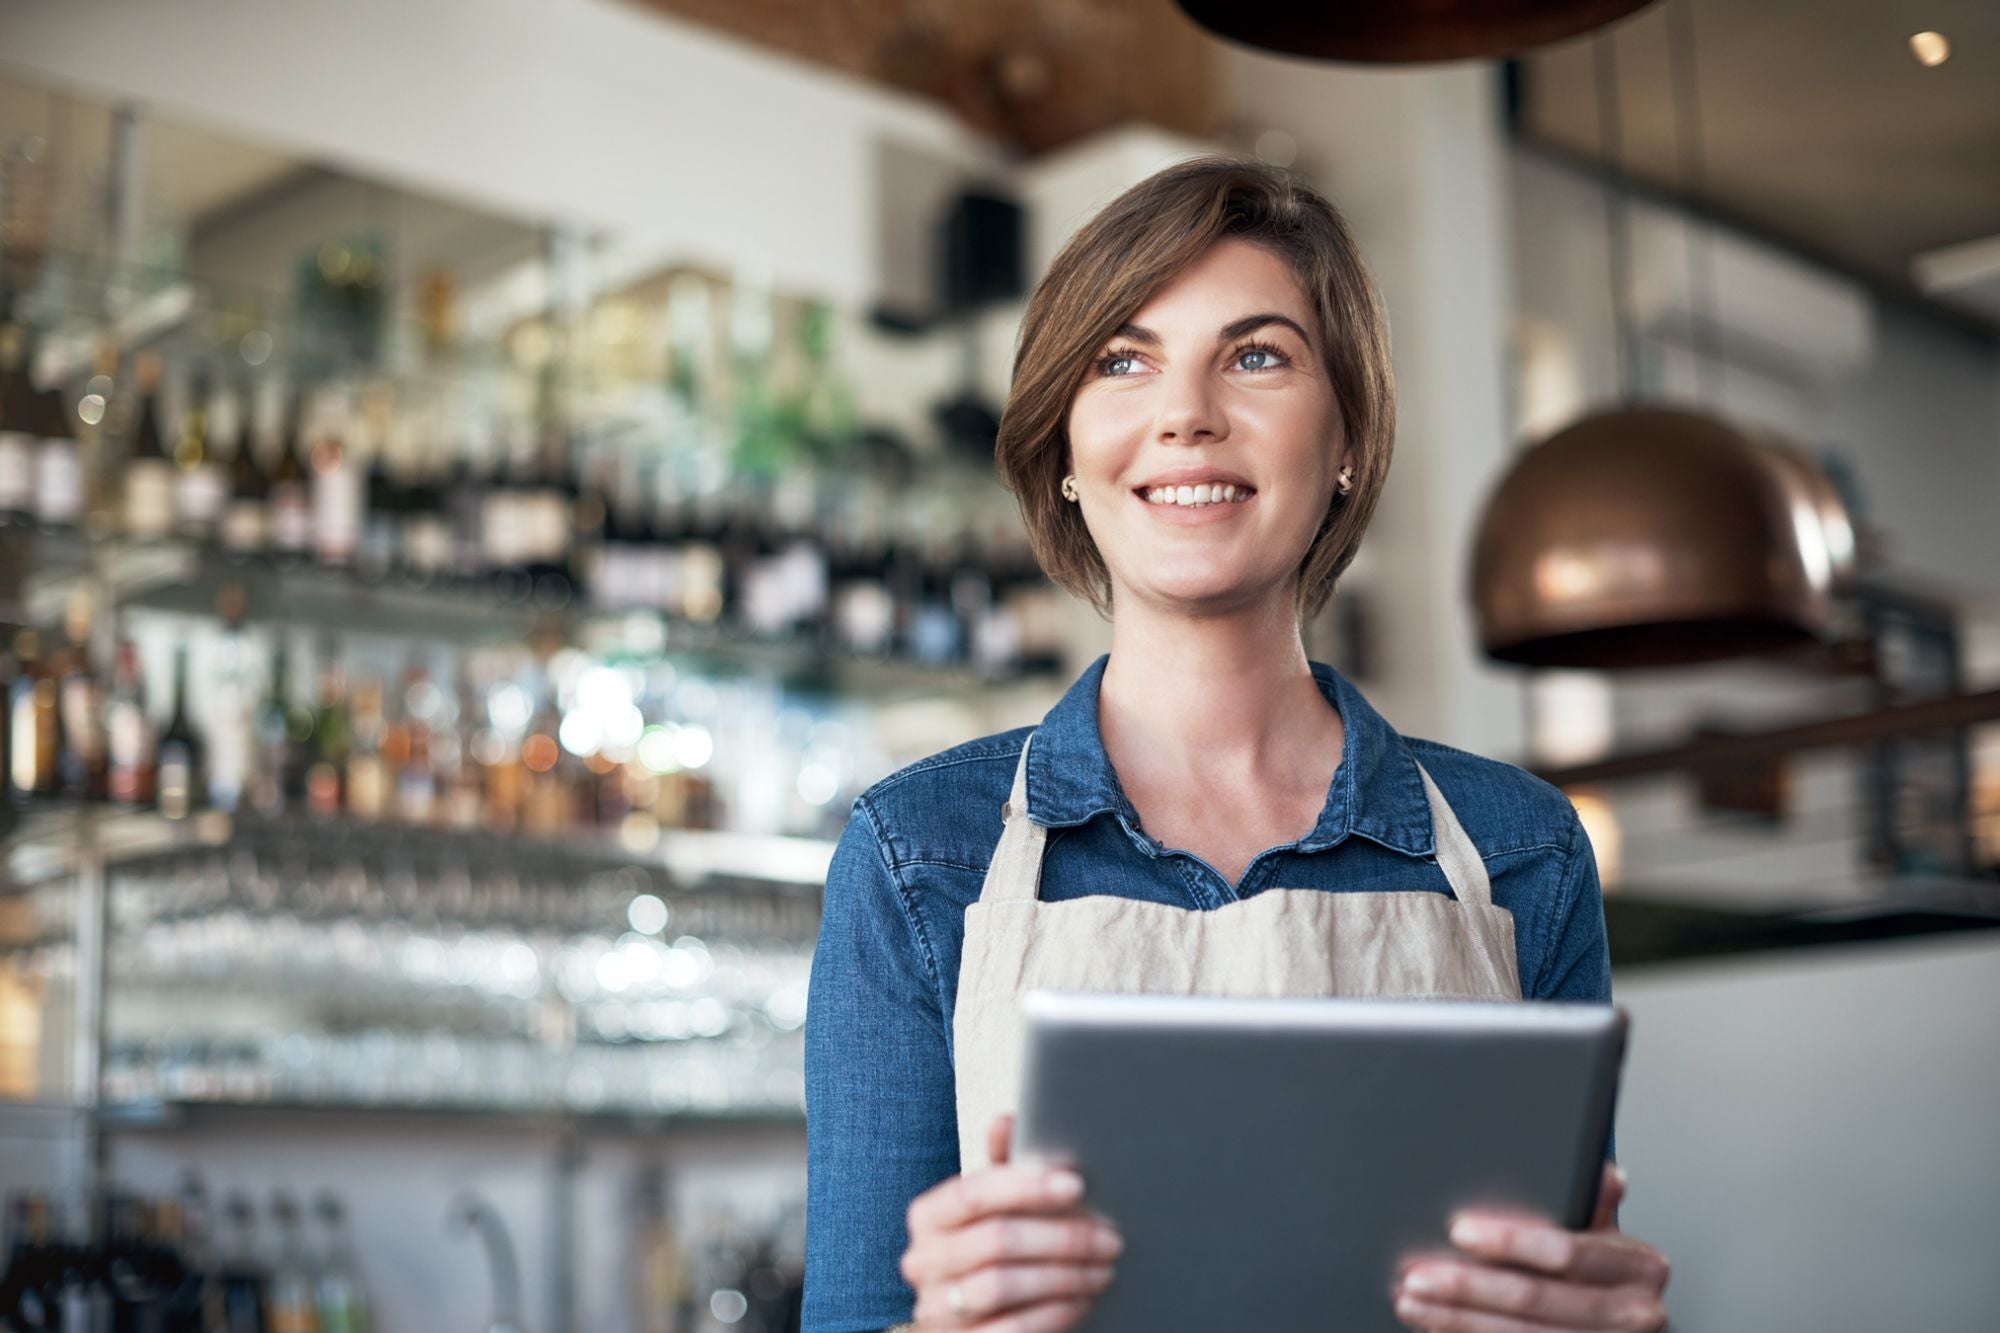 The Best POS System for Small Restaurants: 6 Must-Have Features